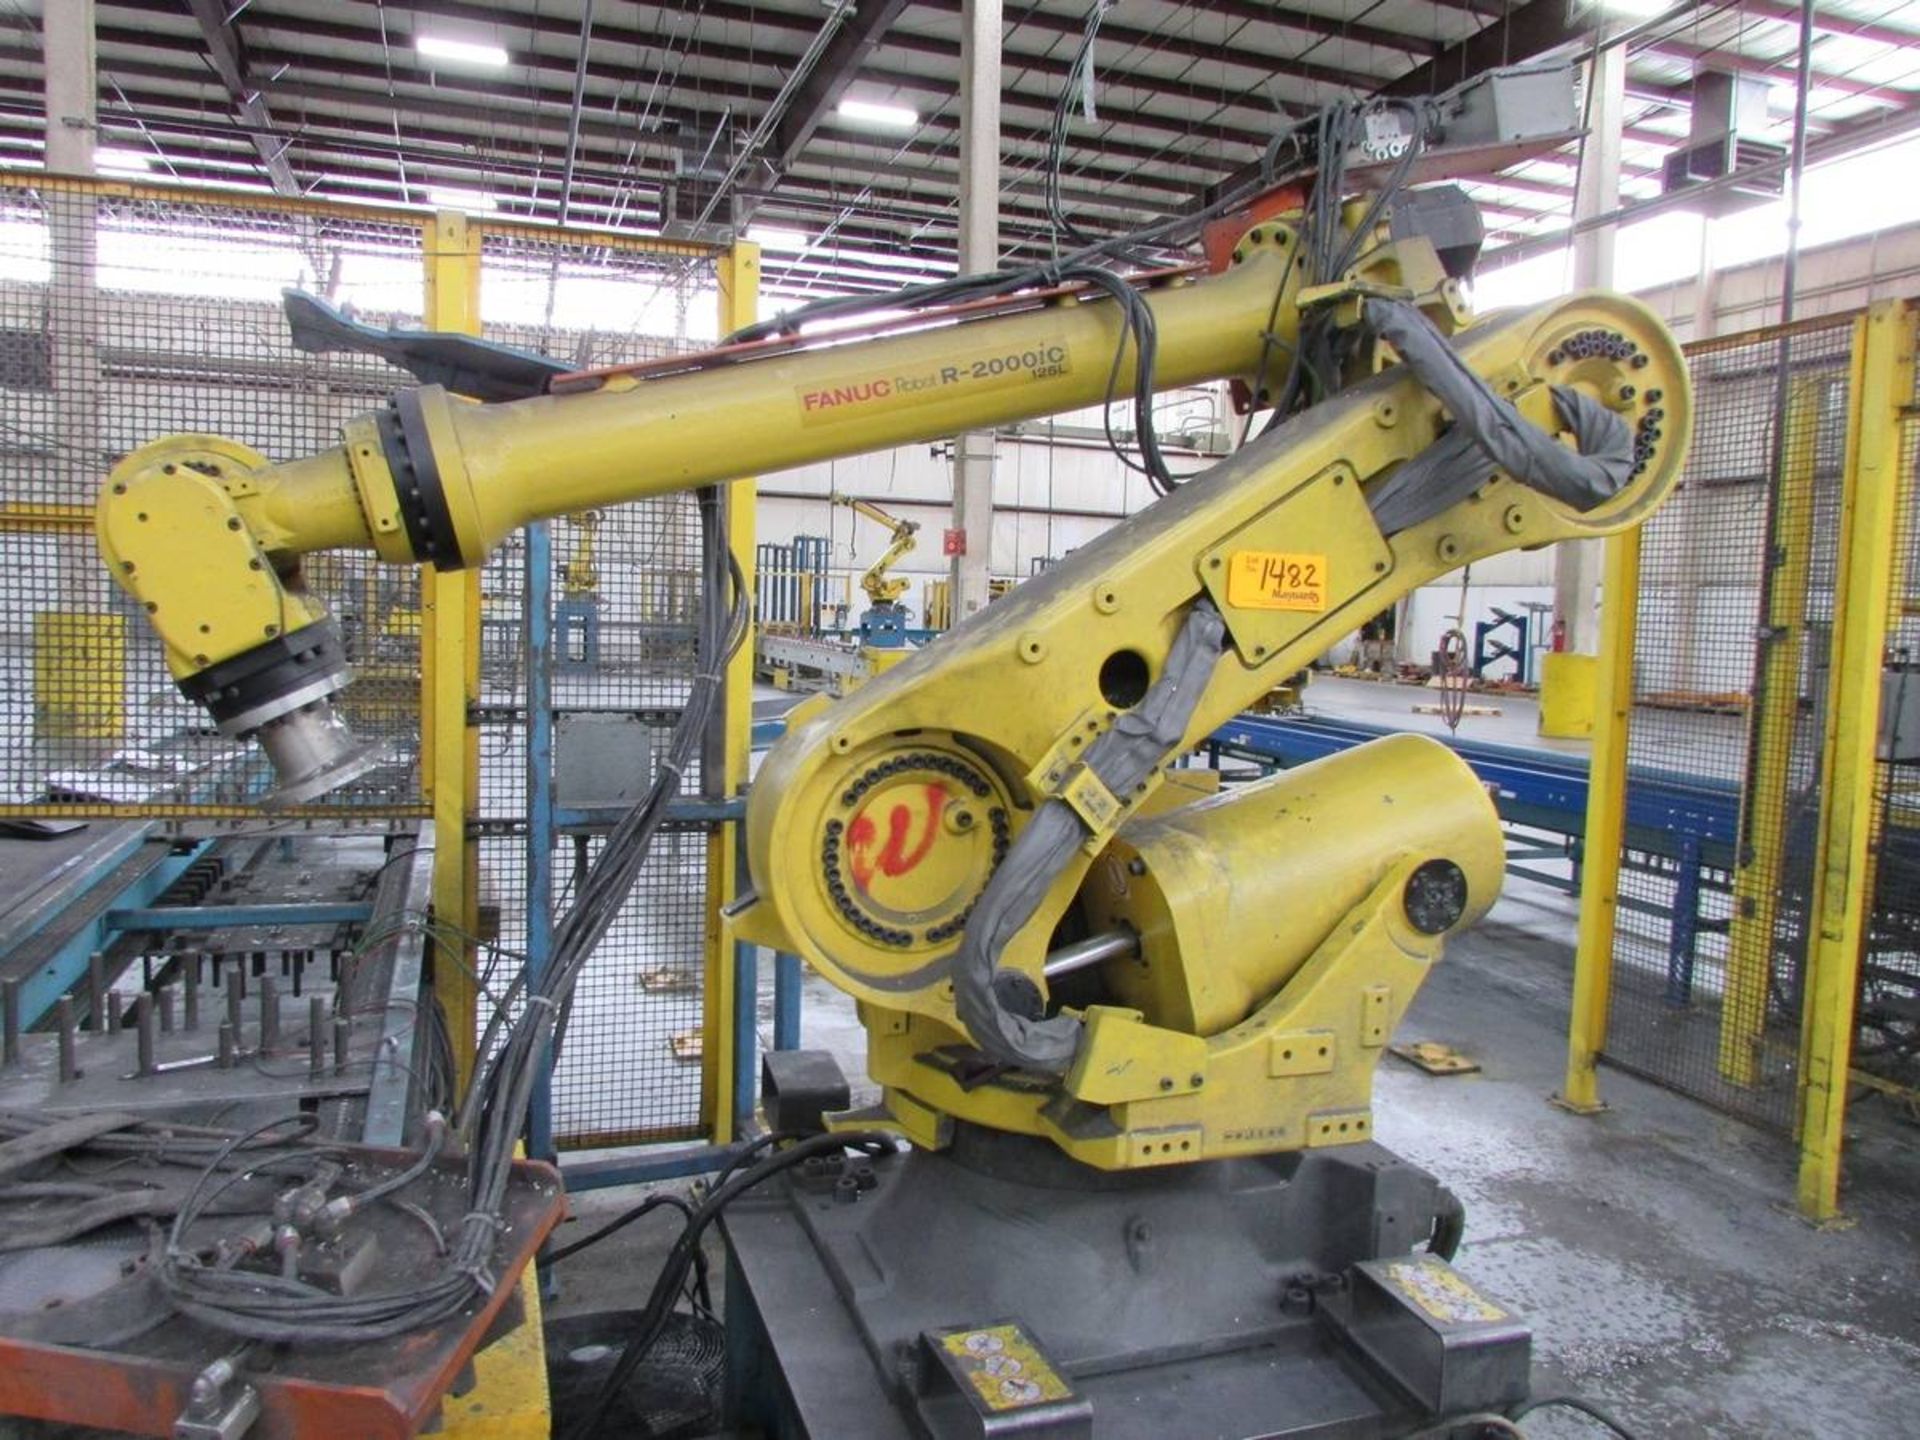 2015 Fanuc R 2000 iC 125L 6 Axis Material Handling Robot - Image 2 of 11